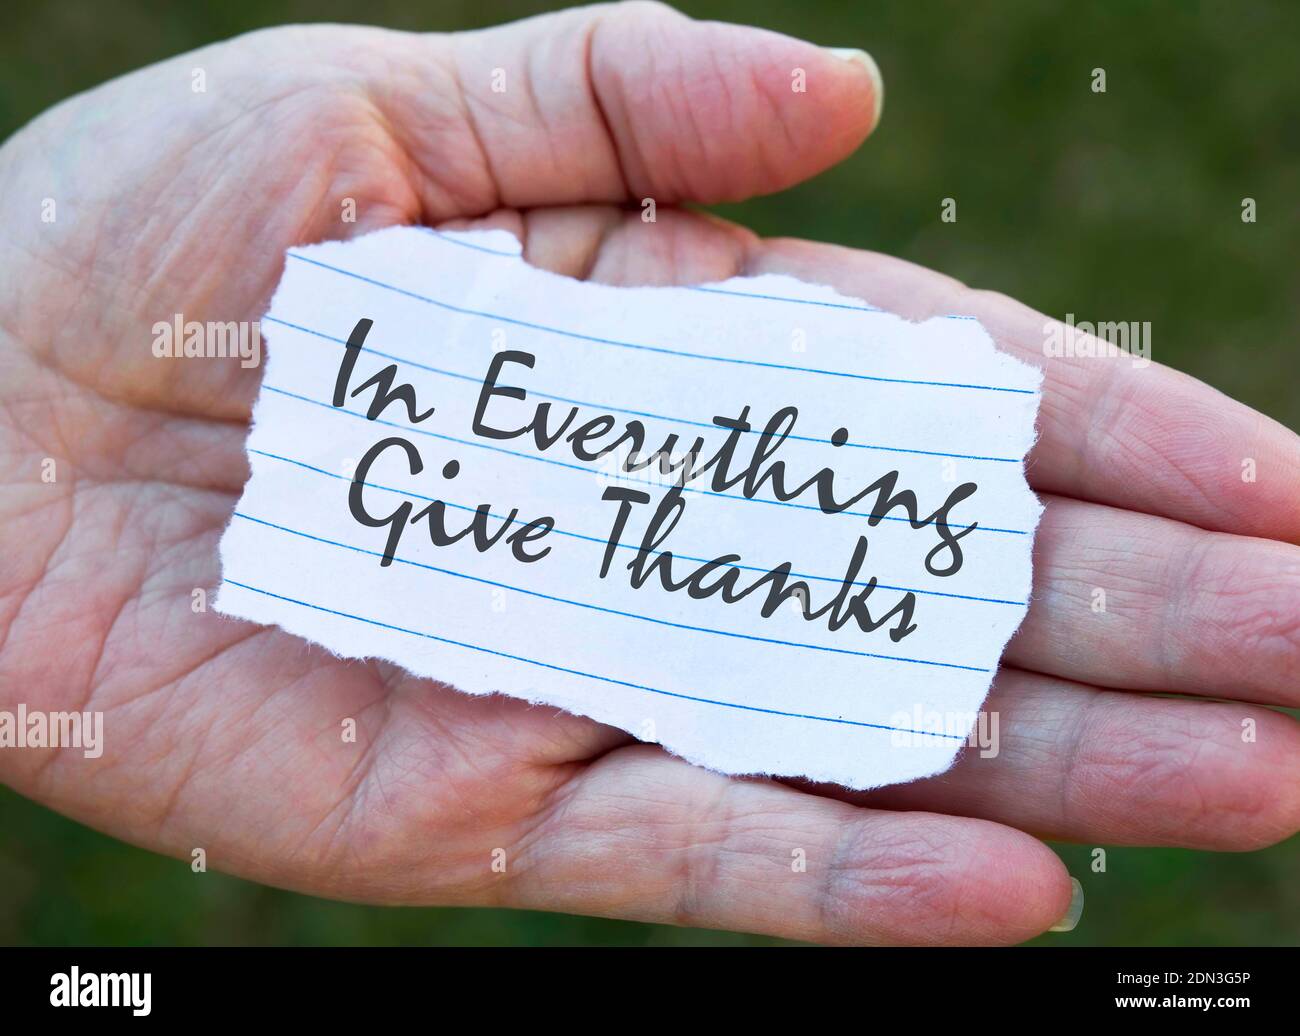 In Everthing Give Thanks. Stock Photo